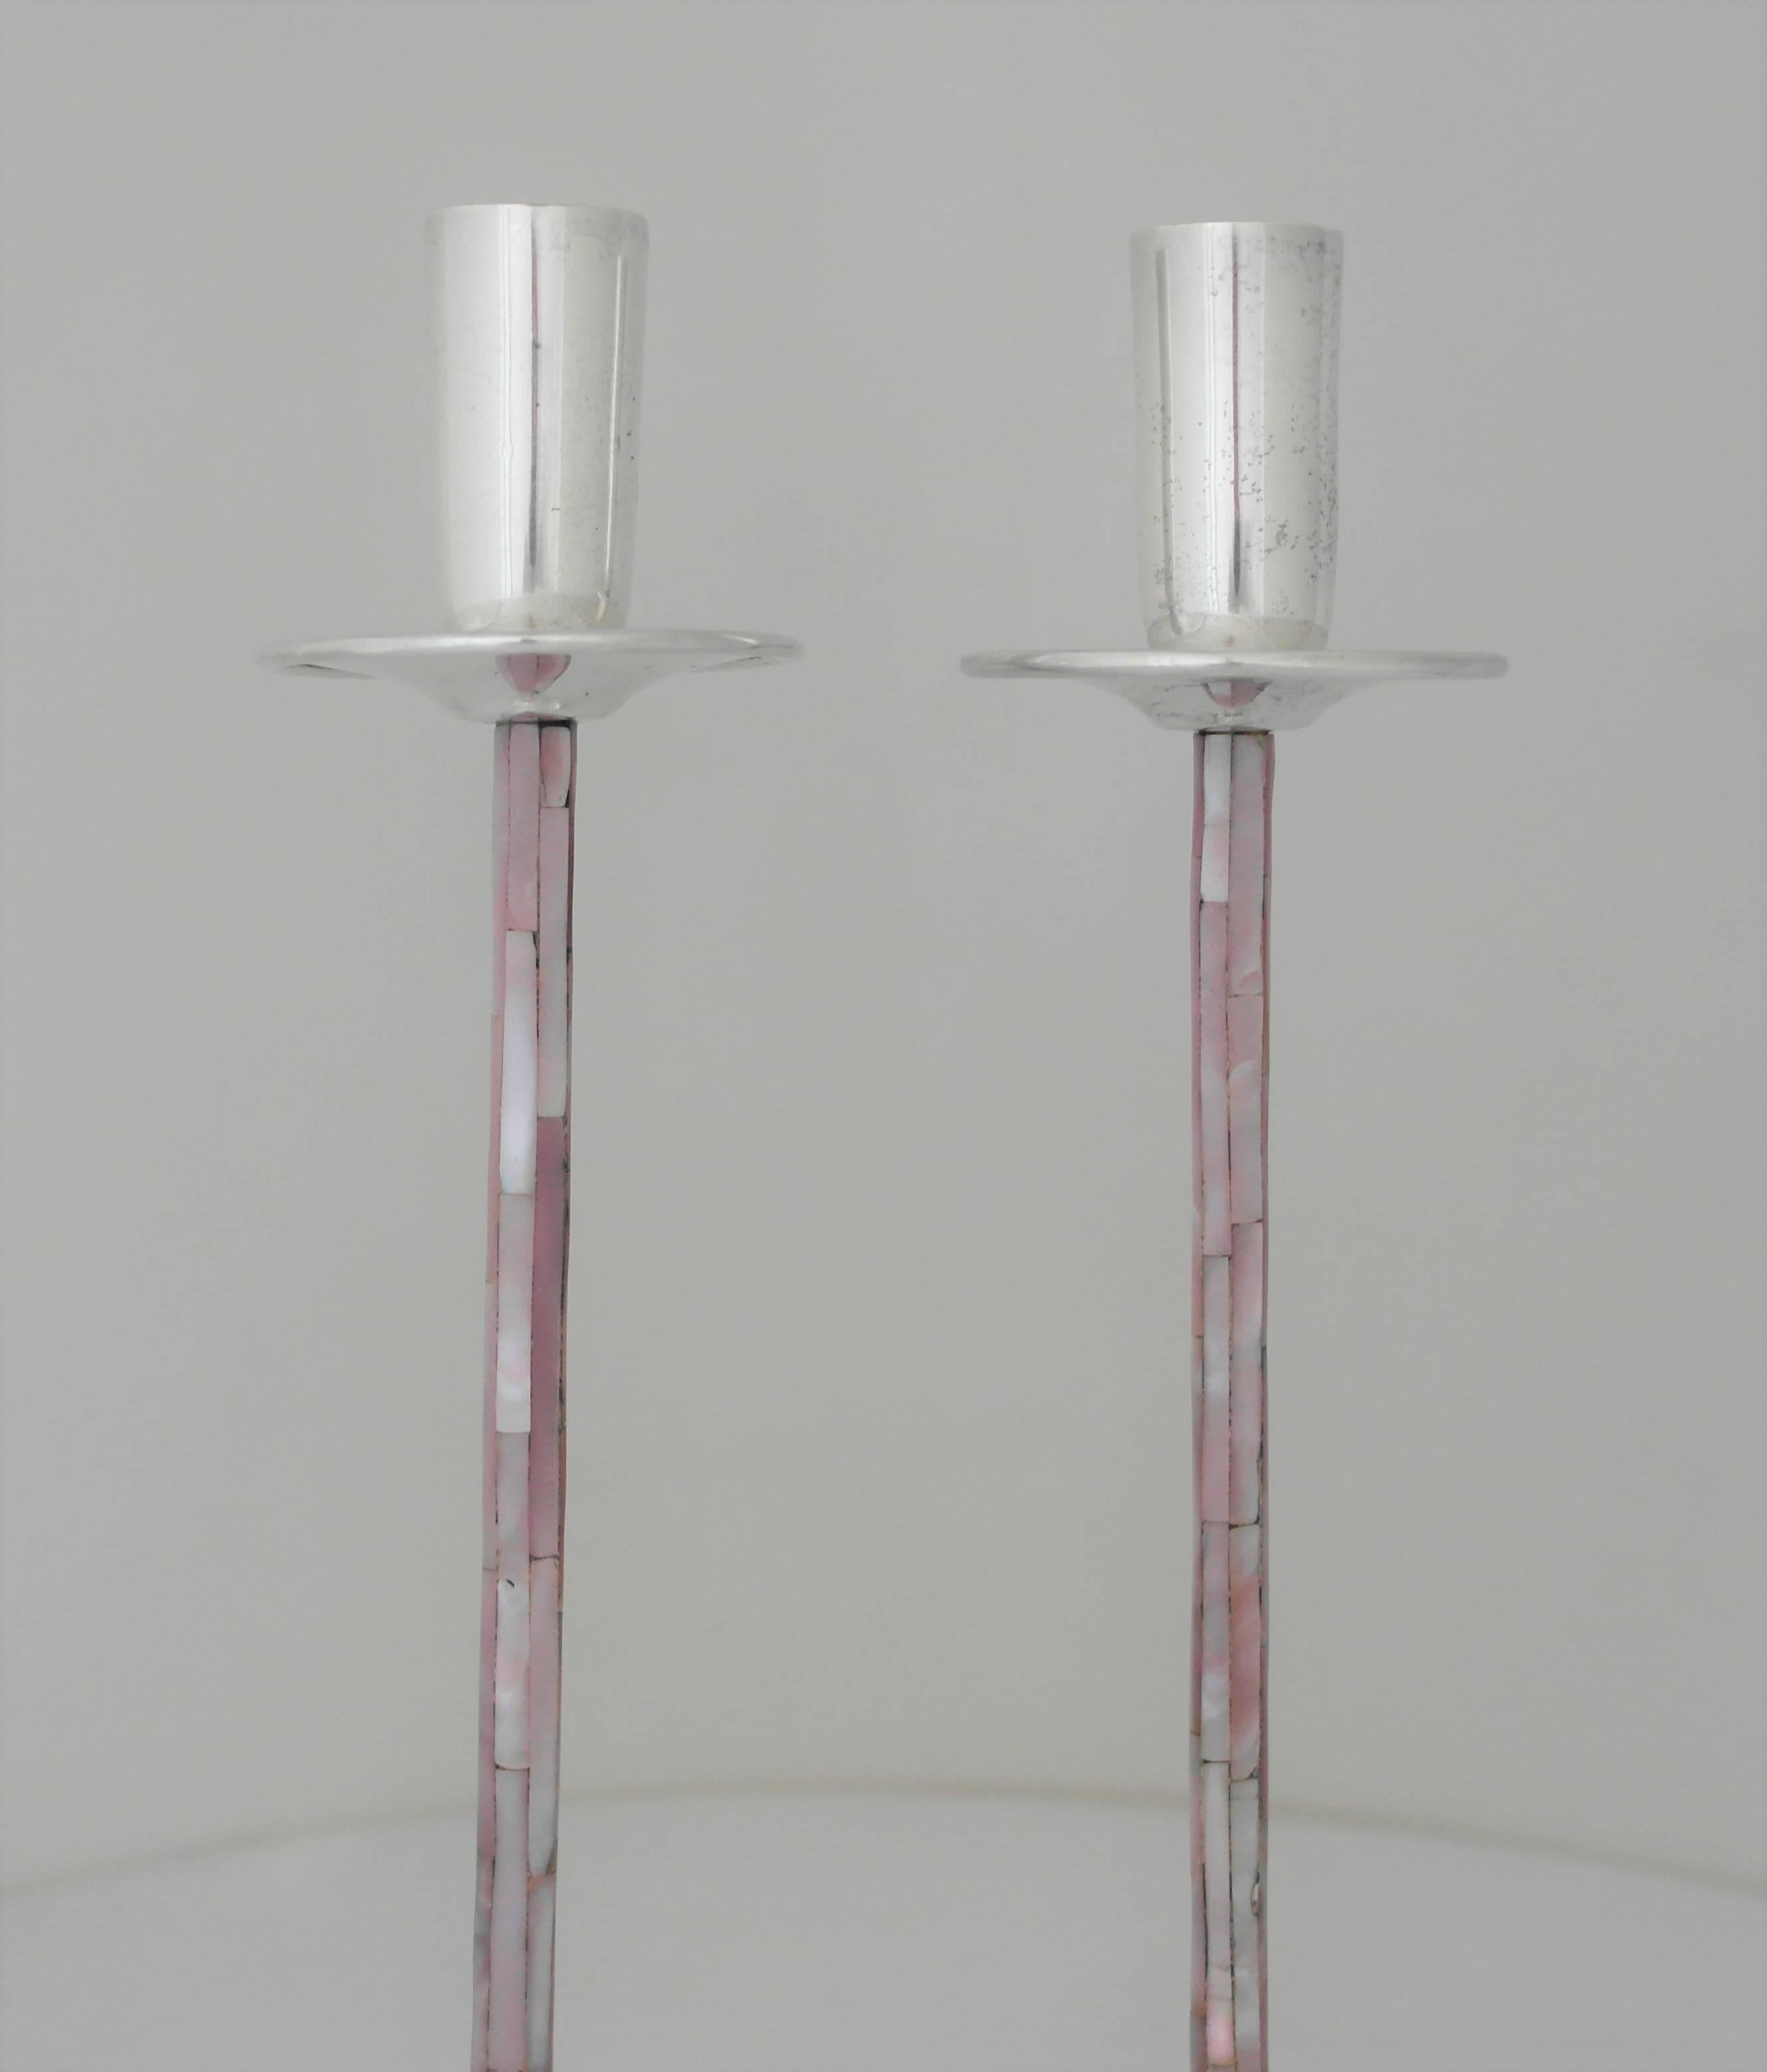 Being offered is a pair of highly decorative candlesticks by Los Castillo of Taxco, Mexico. Hand-wrought pair made of silver plate with abalone inlay on the tall, elegant stems. Dimensions: 11 1/2 inches tall; 3 inches diameter. Marked as